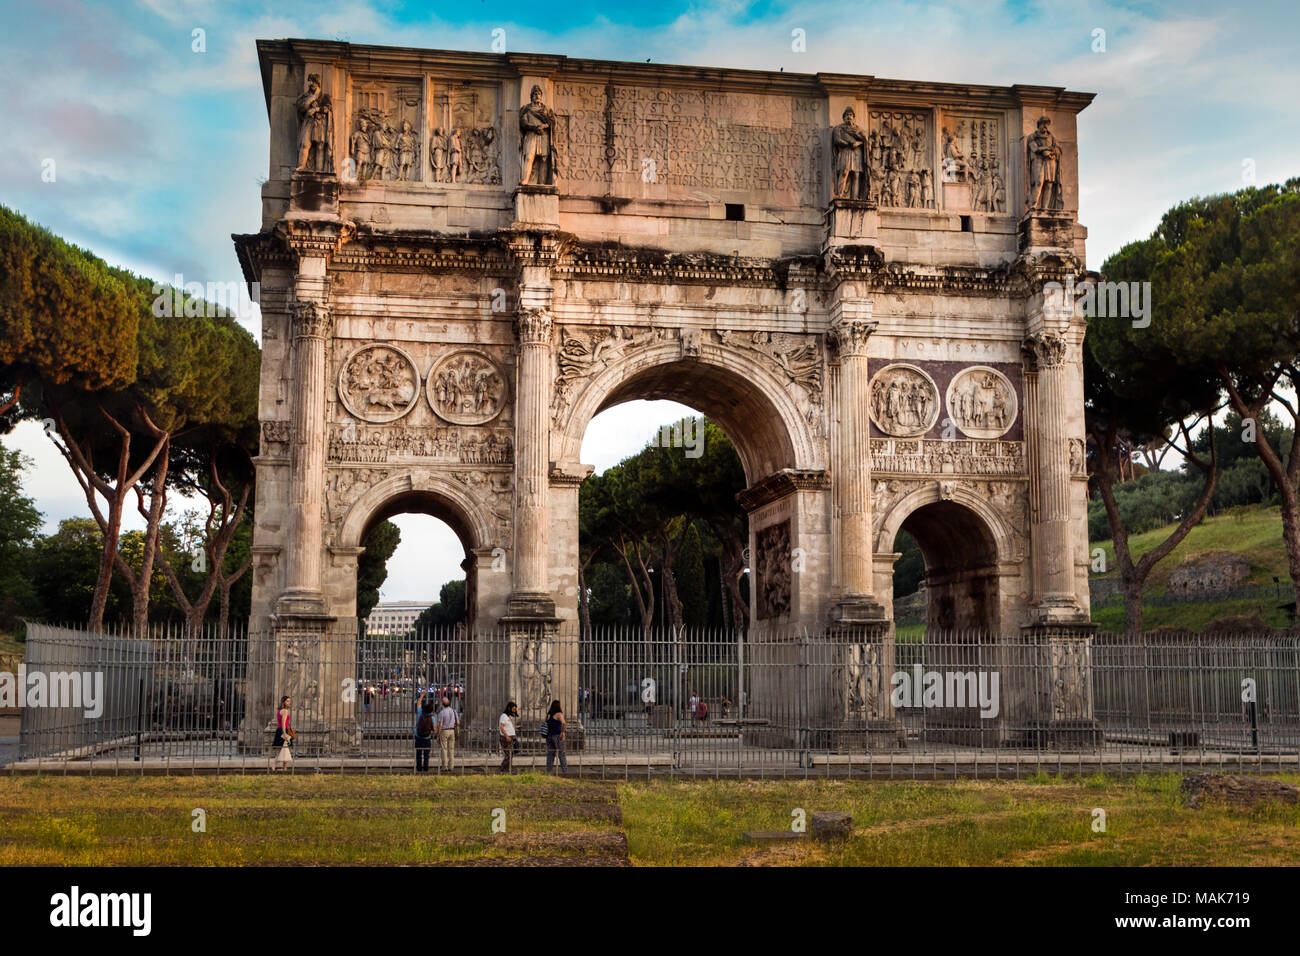 The Arch of Constantine in the Forum, Rome, flanked by Rome's symbolic Umbrella Pine trees, it is the largest Roman triumphal arch Stock Photo